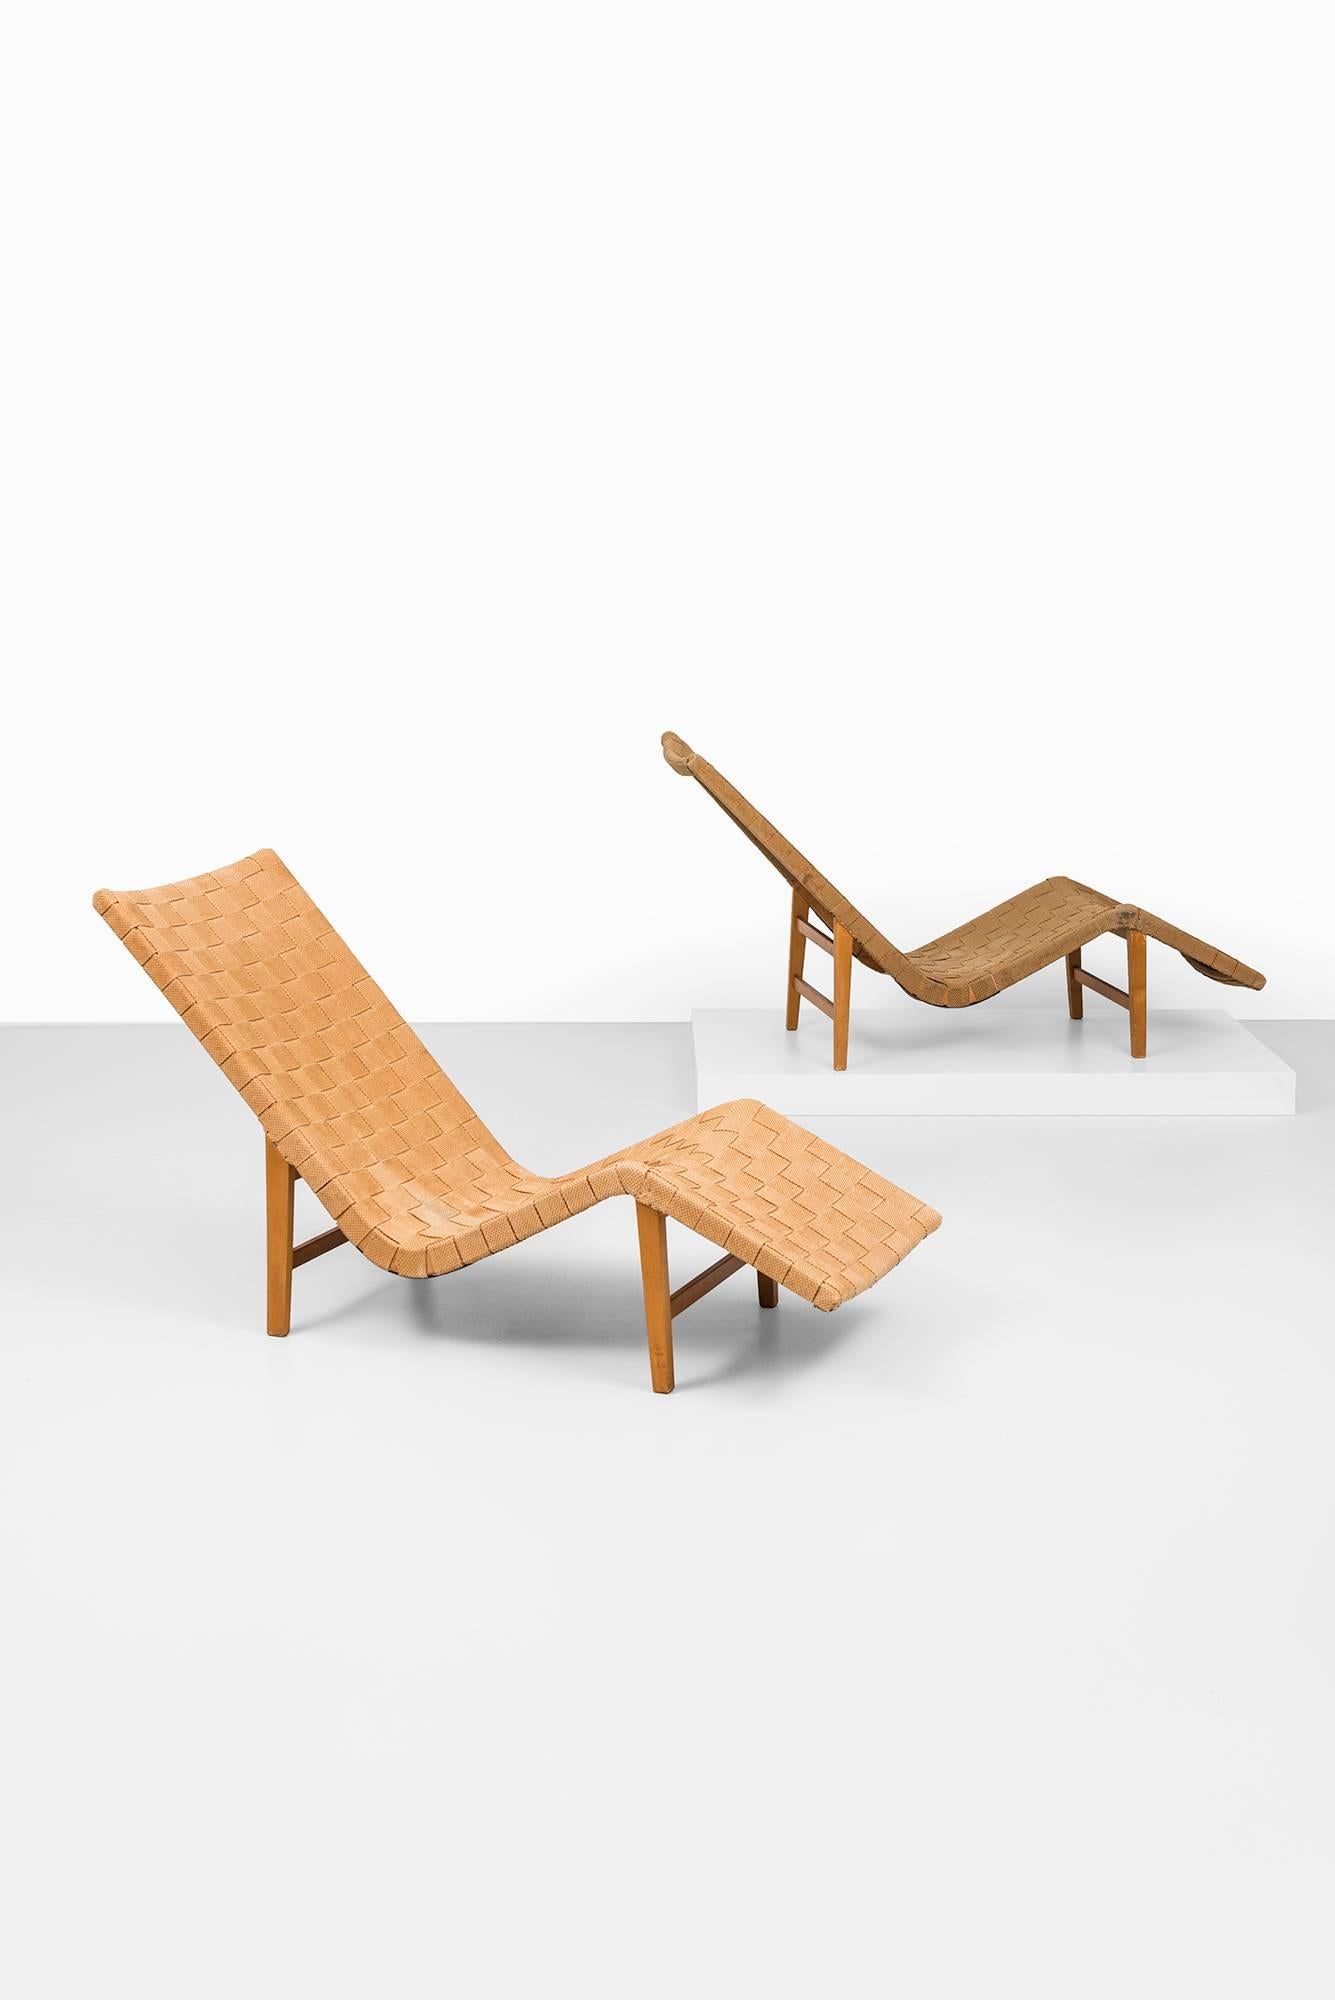 Rare pair of Swedish lounge chairs in the manner of GA Berg. Produced in Sweden, 1930s-1940s. Original paper webbing.